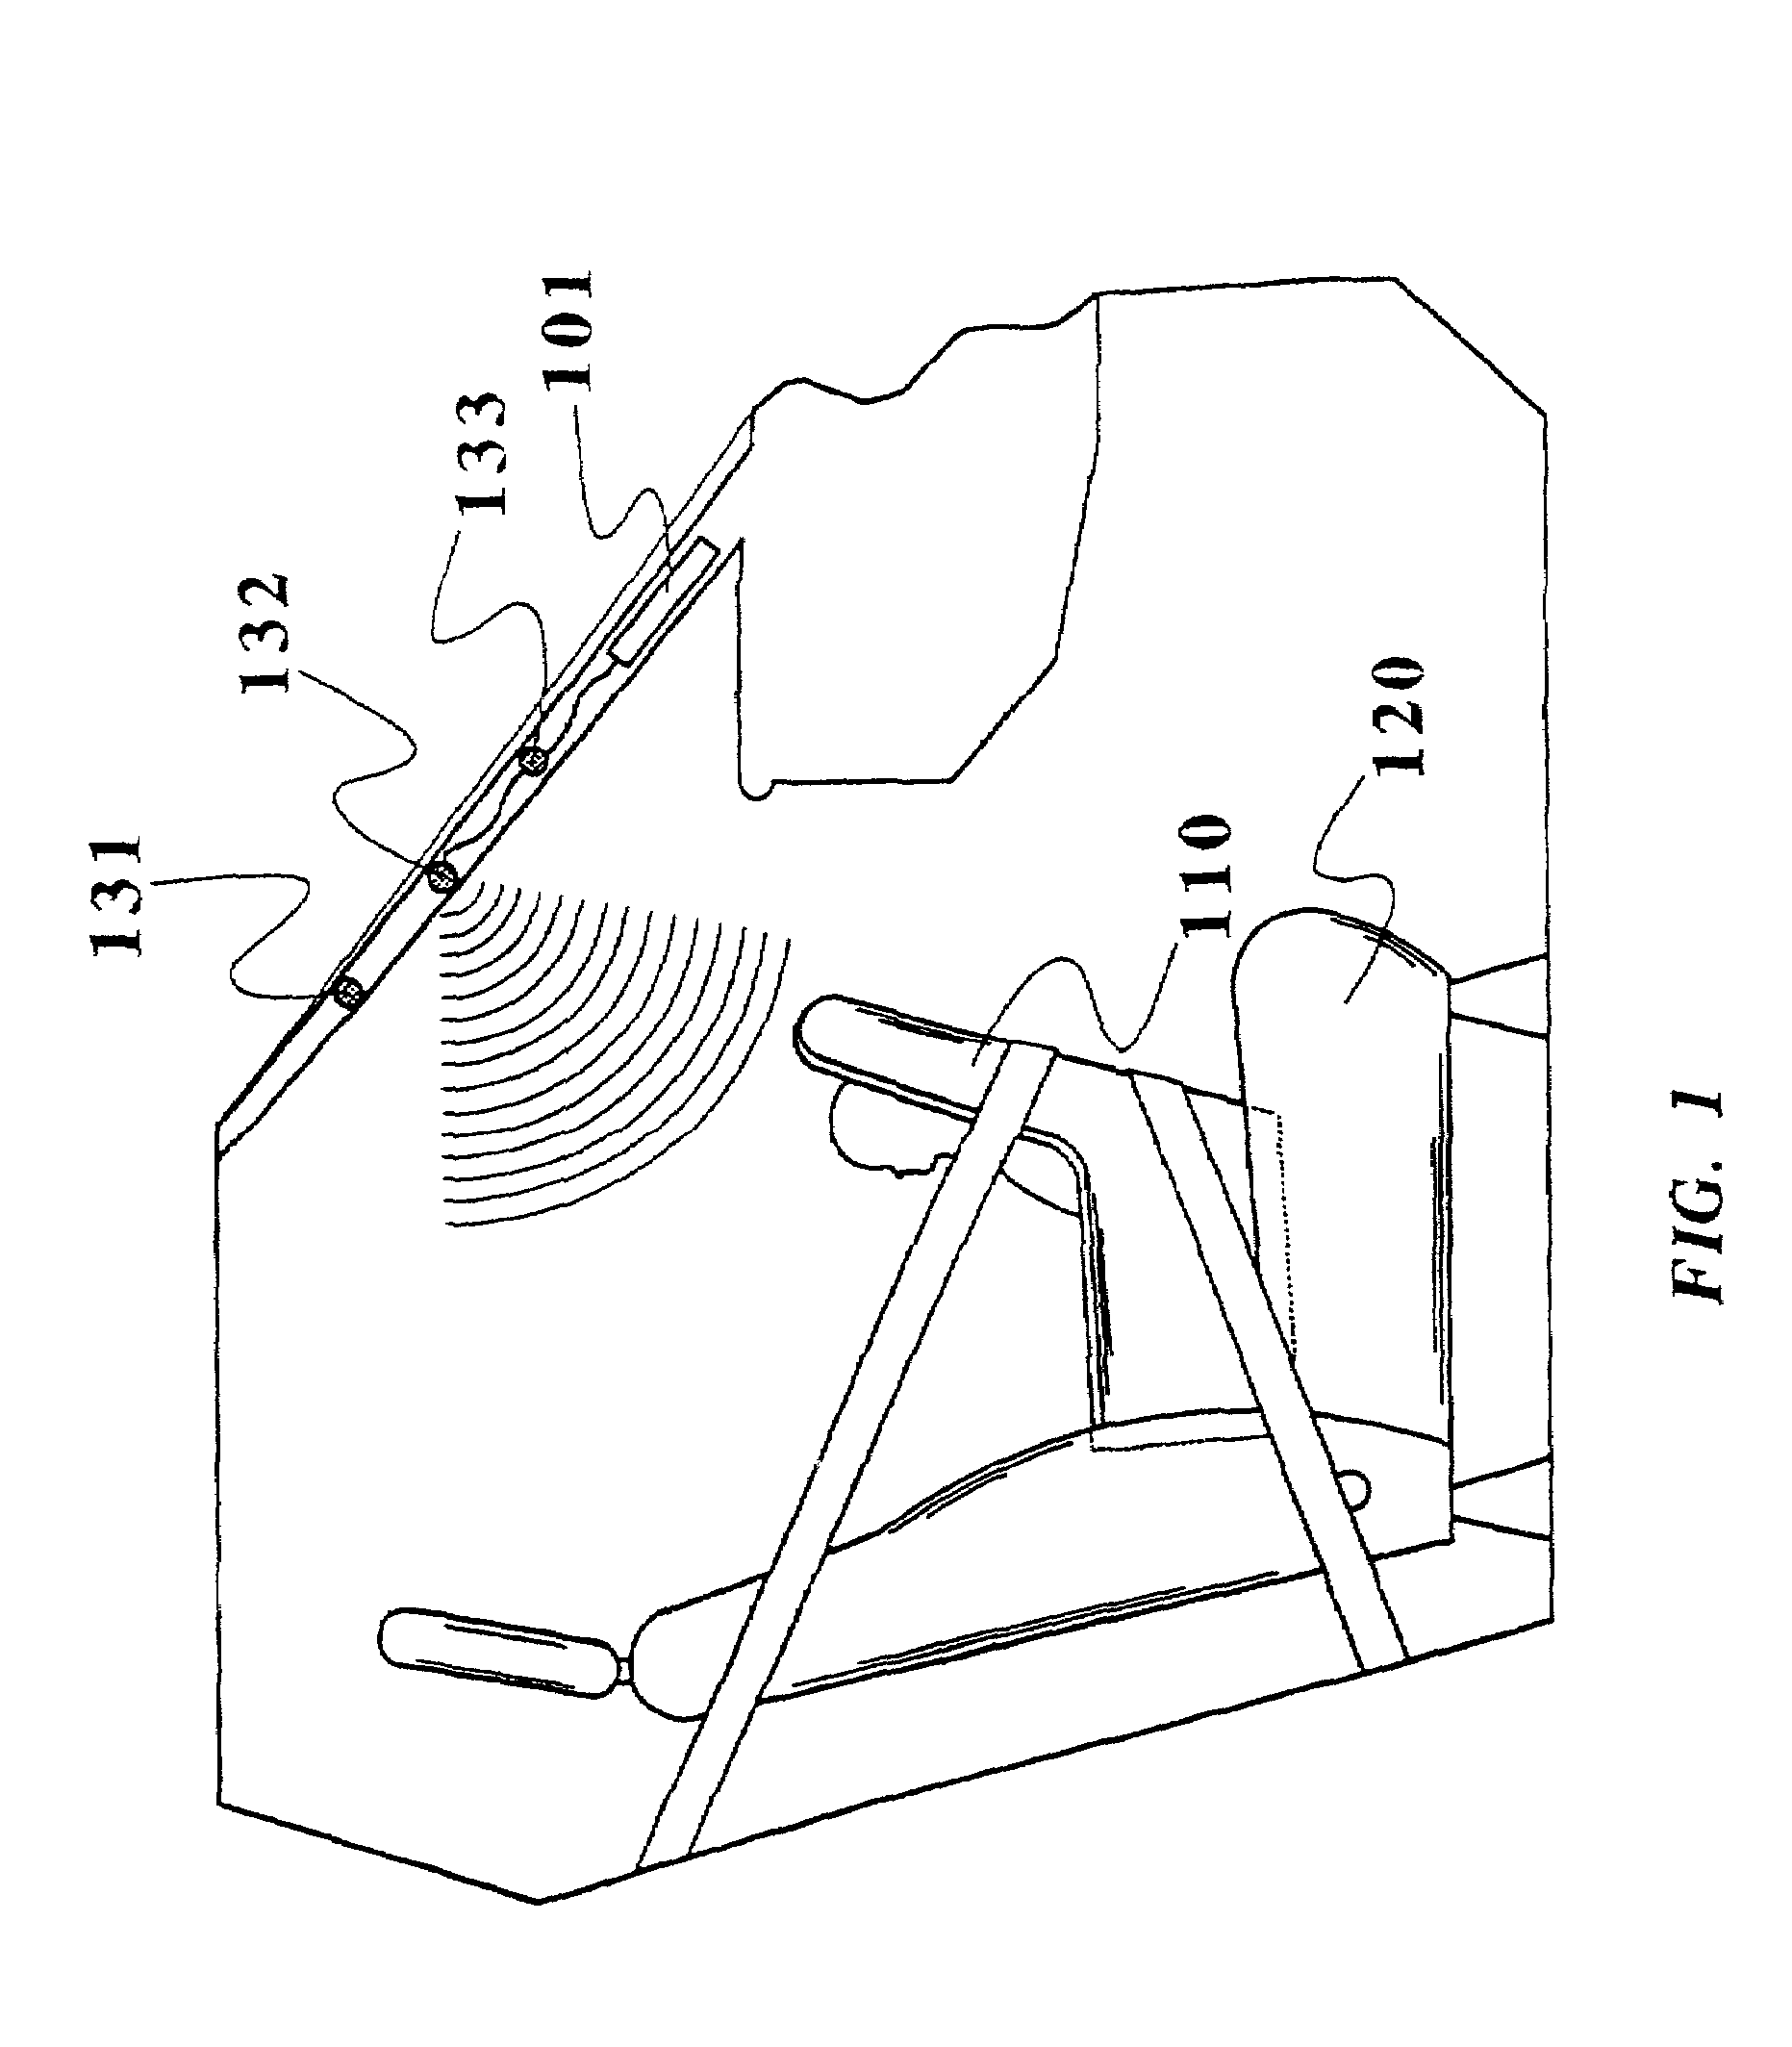 Vehicular occupant characteristic determination system and method